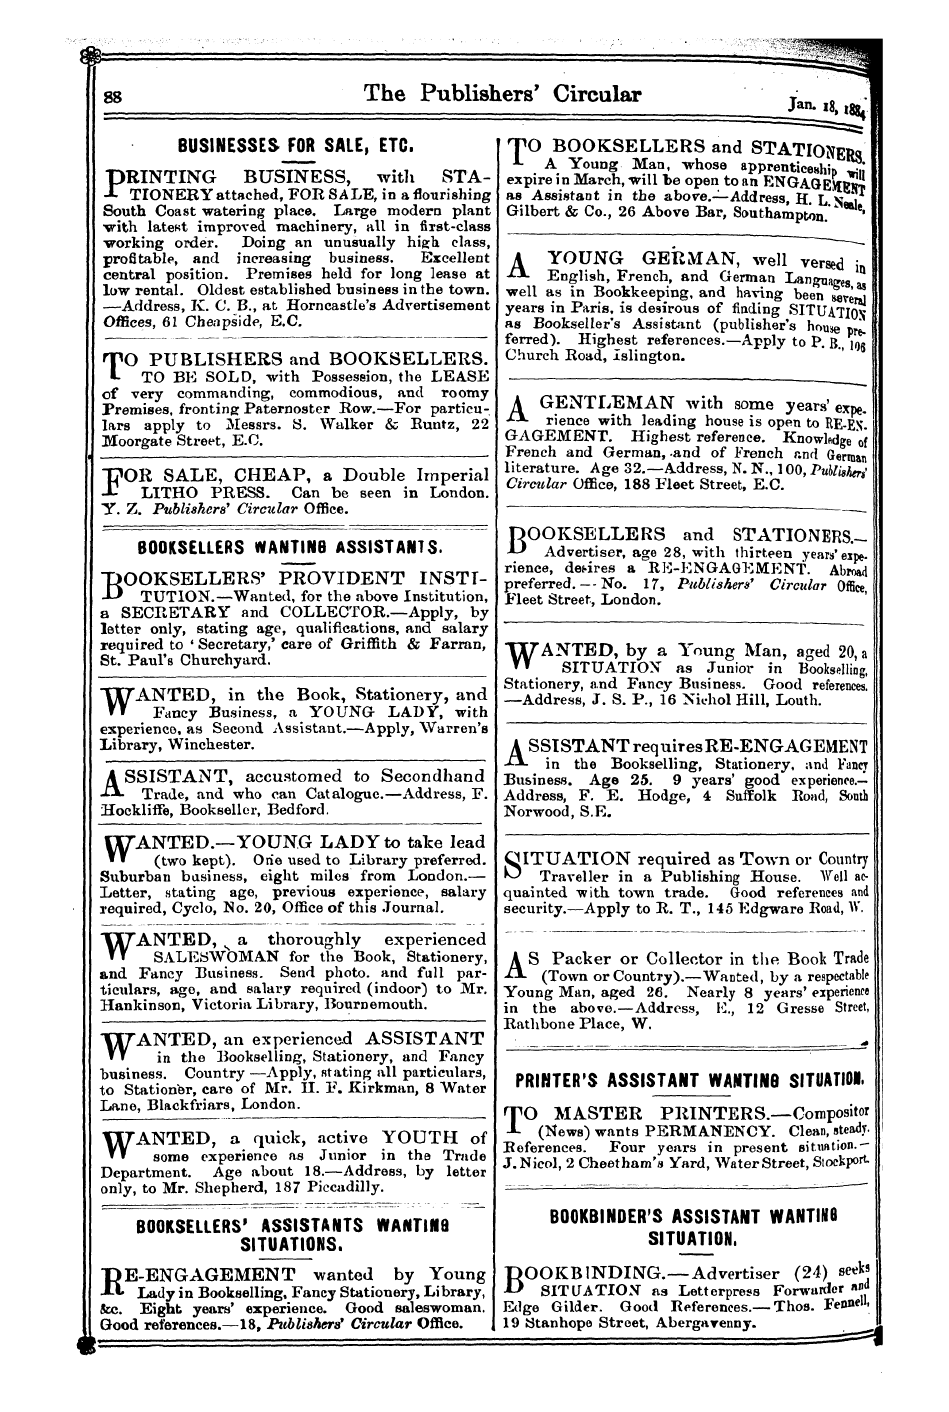 Publishers’ Circular (1880-1890): jS F Y, 1st edition - Businesses For Sale, Etc.